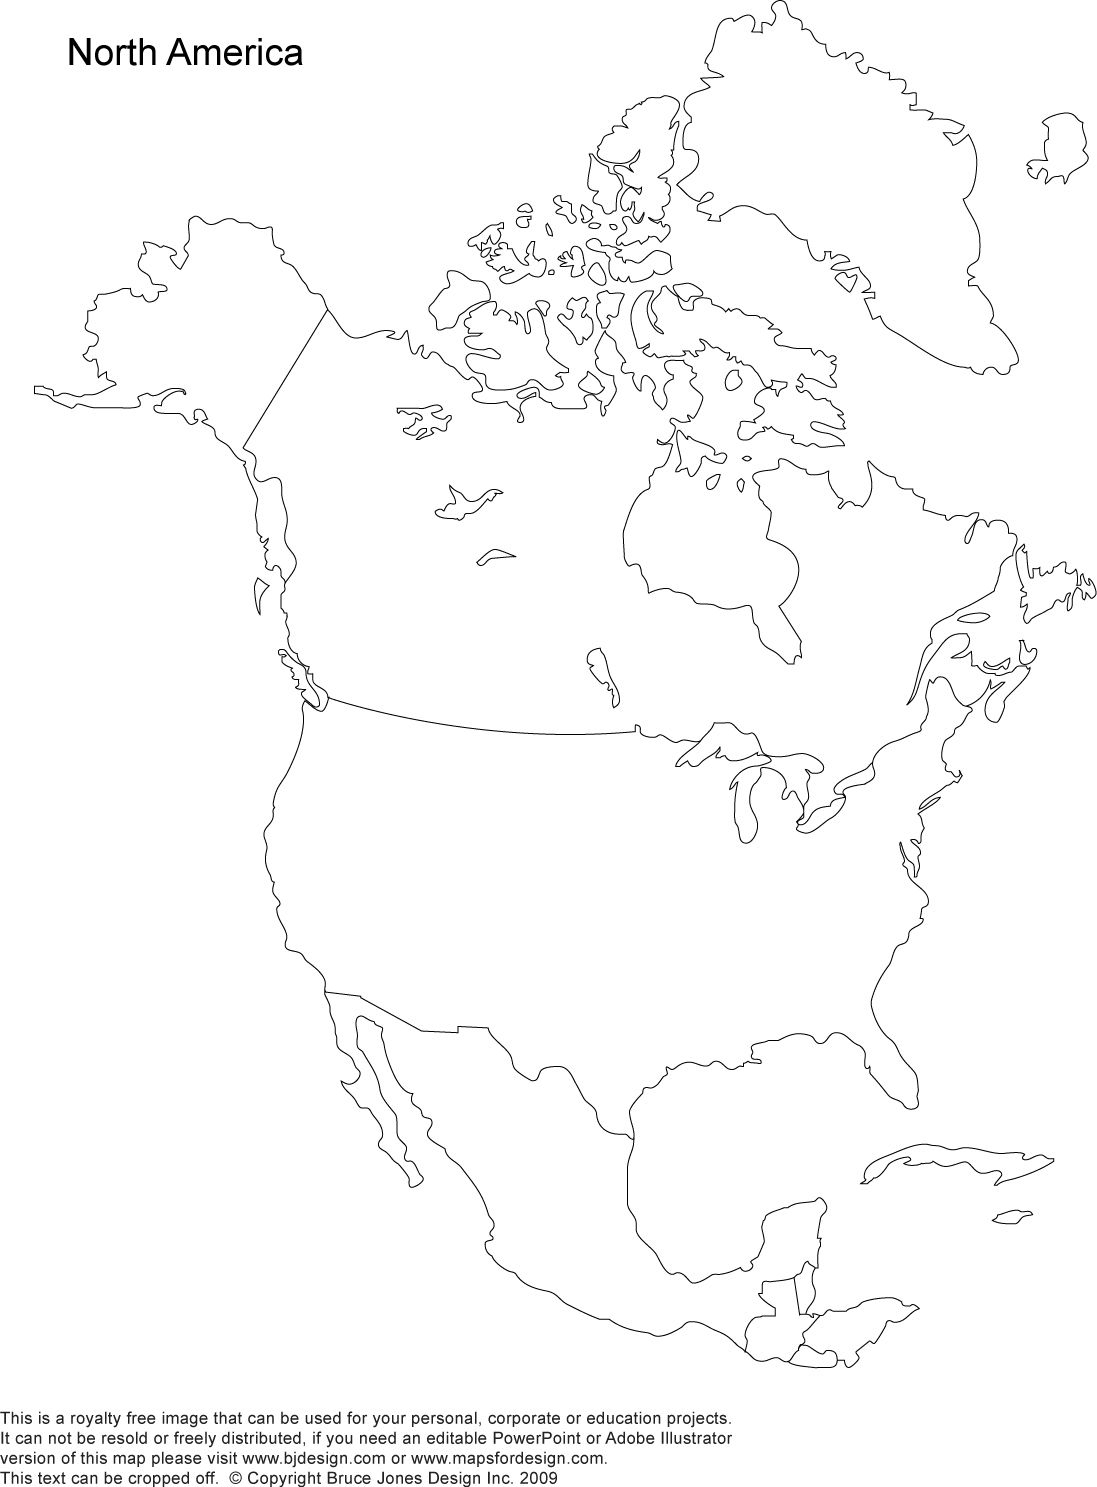 Pinangie Wild On For The Kids | Blank World Map, America Outline - Free Printable Map Of North America